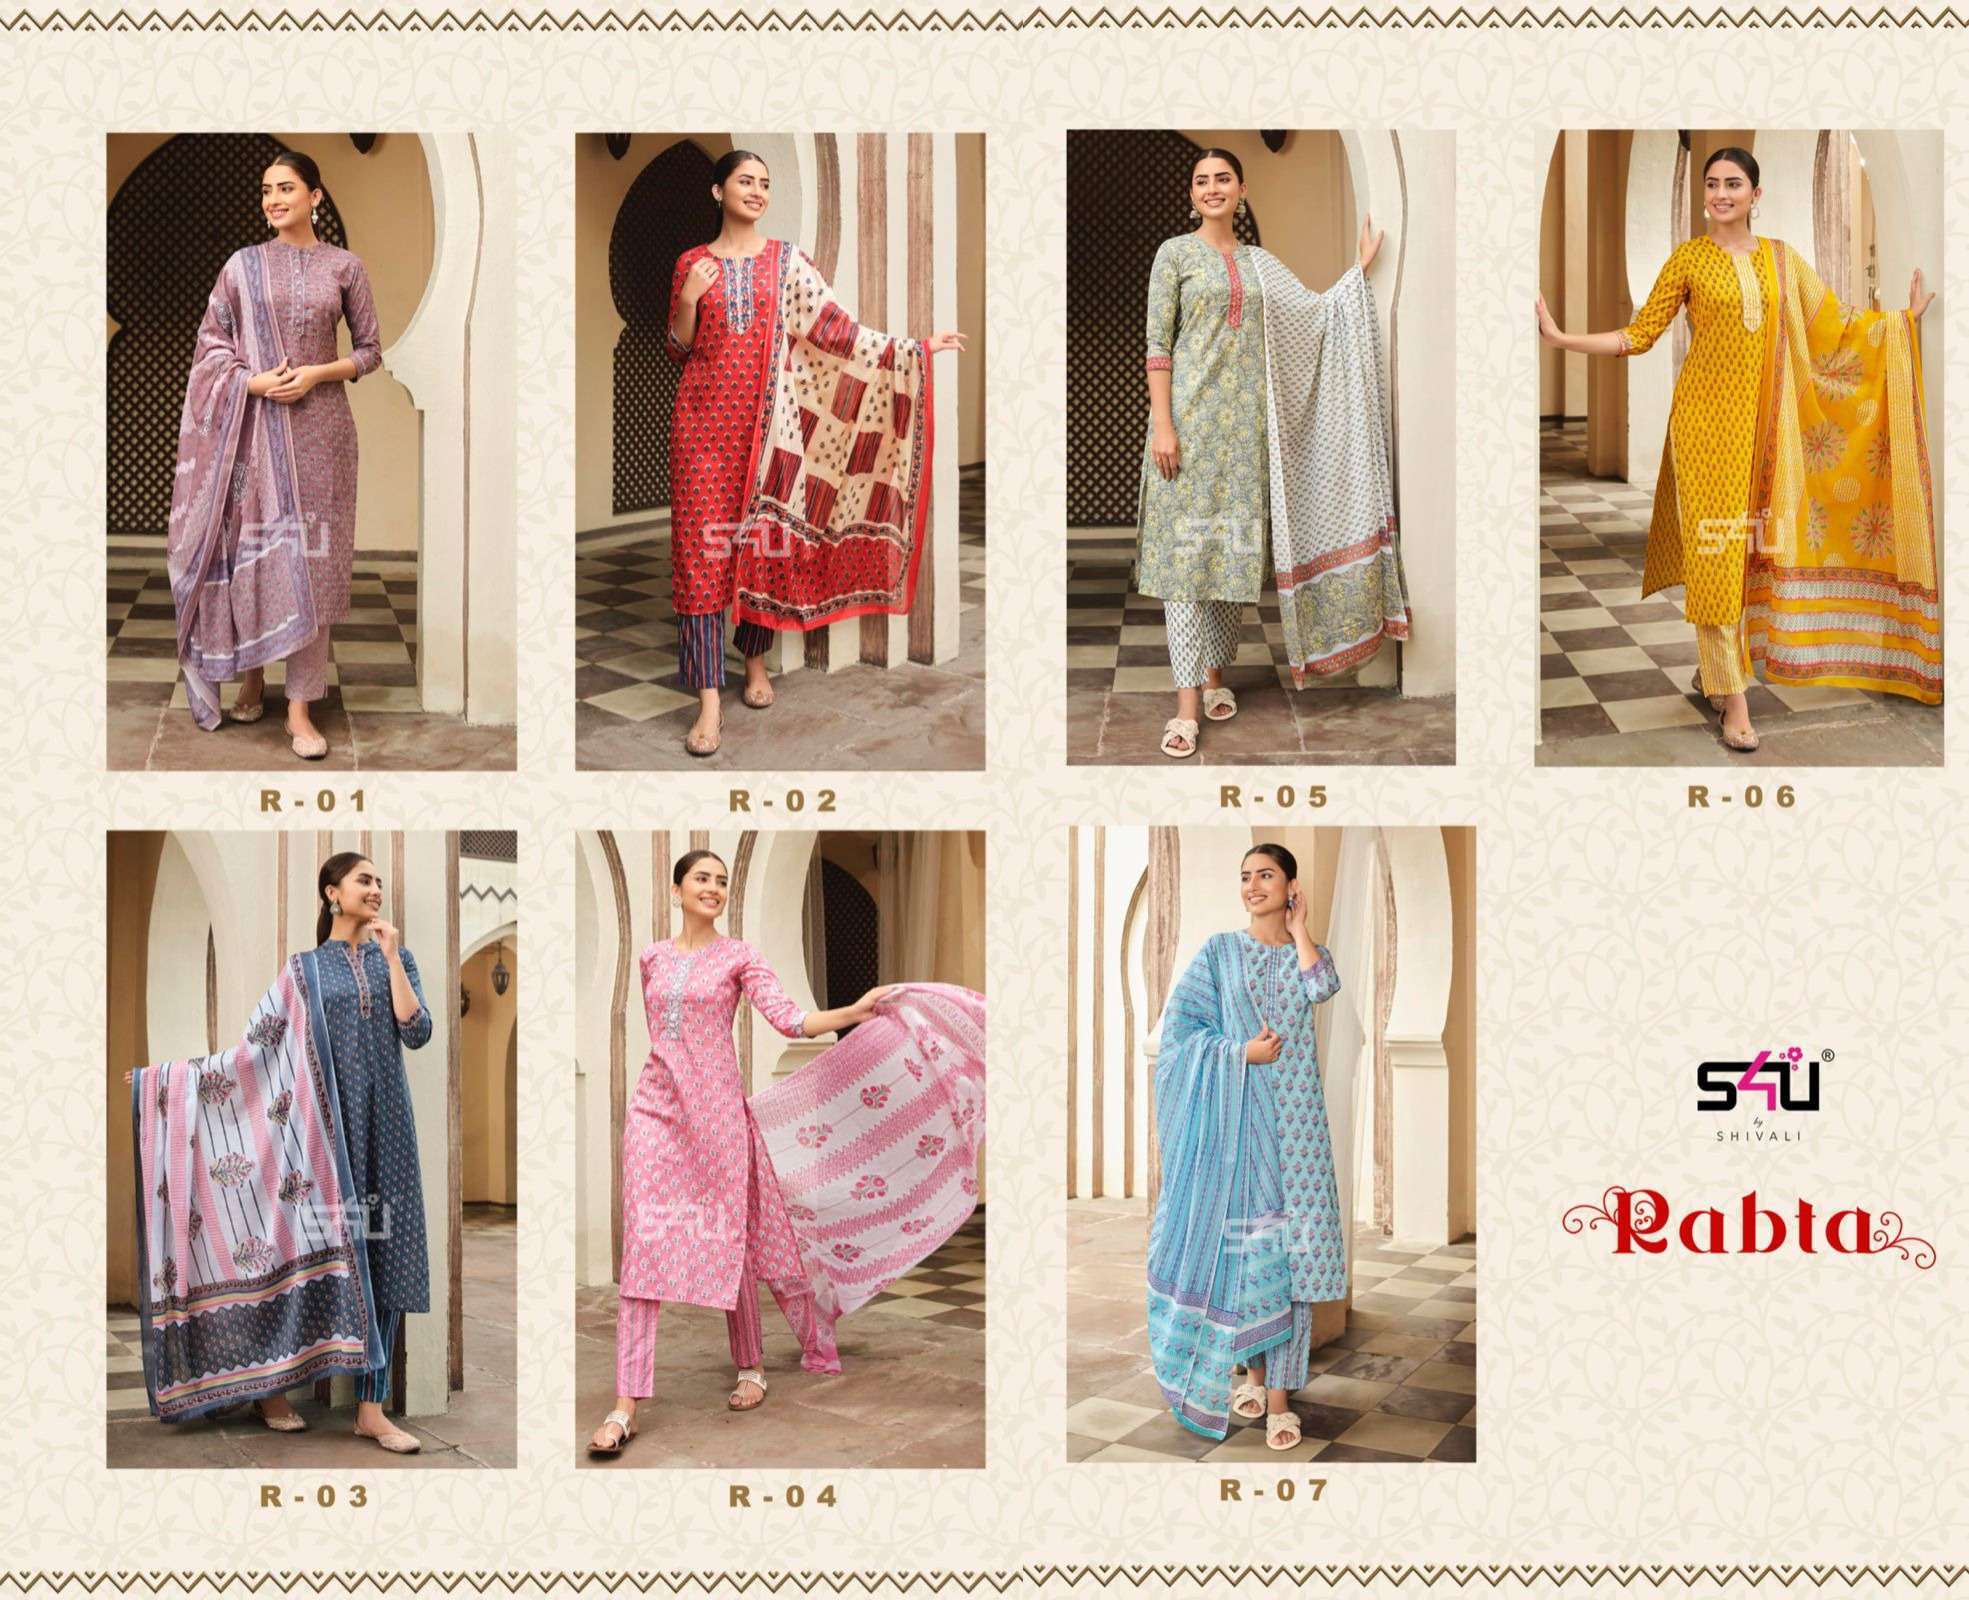 RABTA BY S4U COTTON FULL STICHED SALWAR SUITS WHOLESALE 7 PCS WHOLESALE RATE IN SURAT - SAIDHARANX 